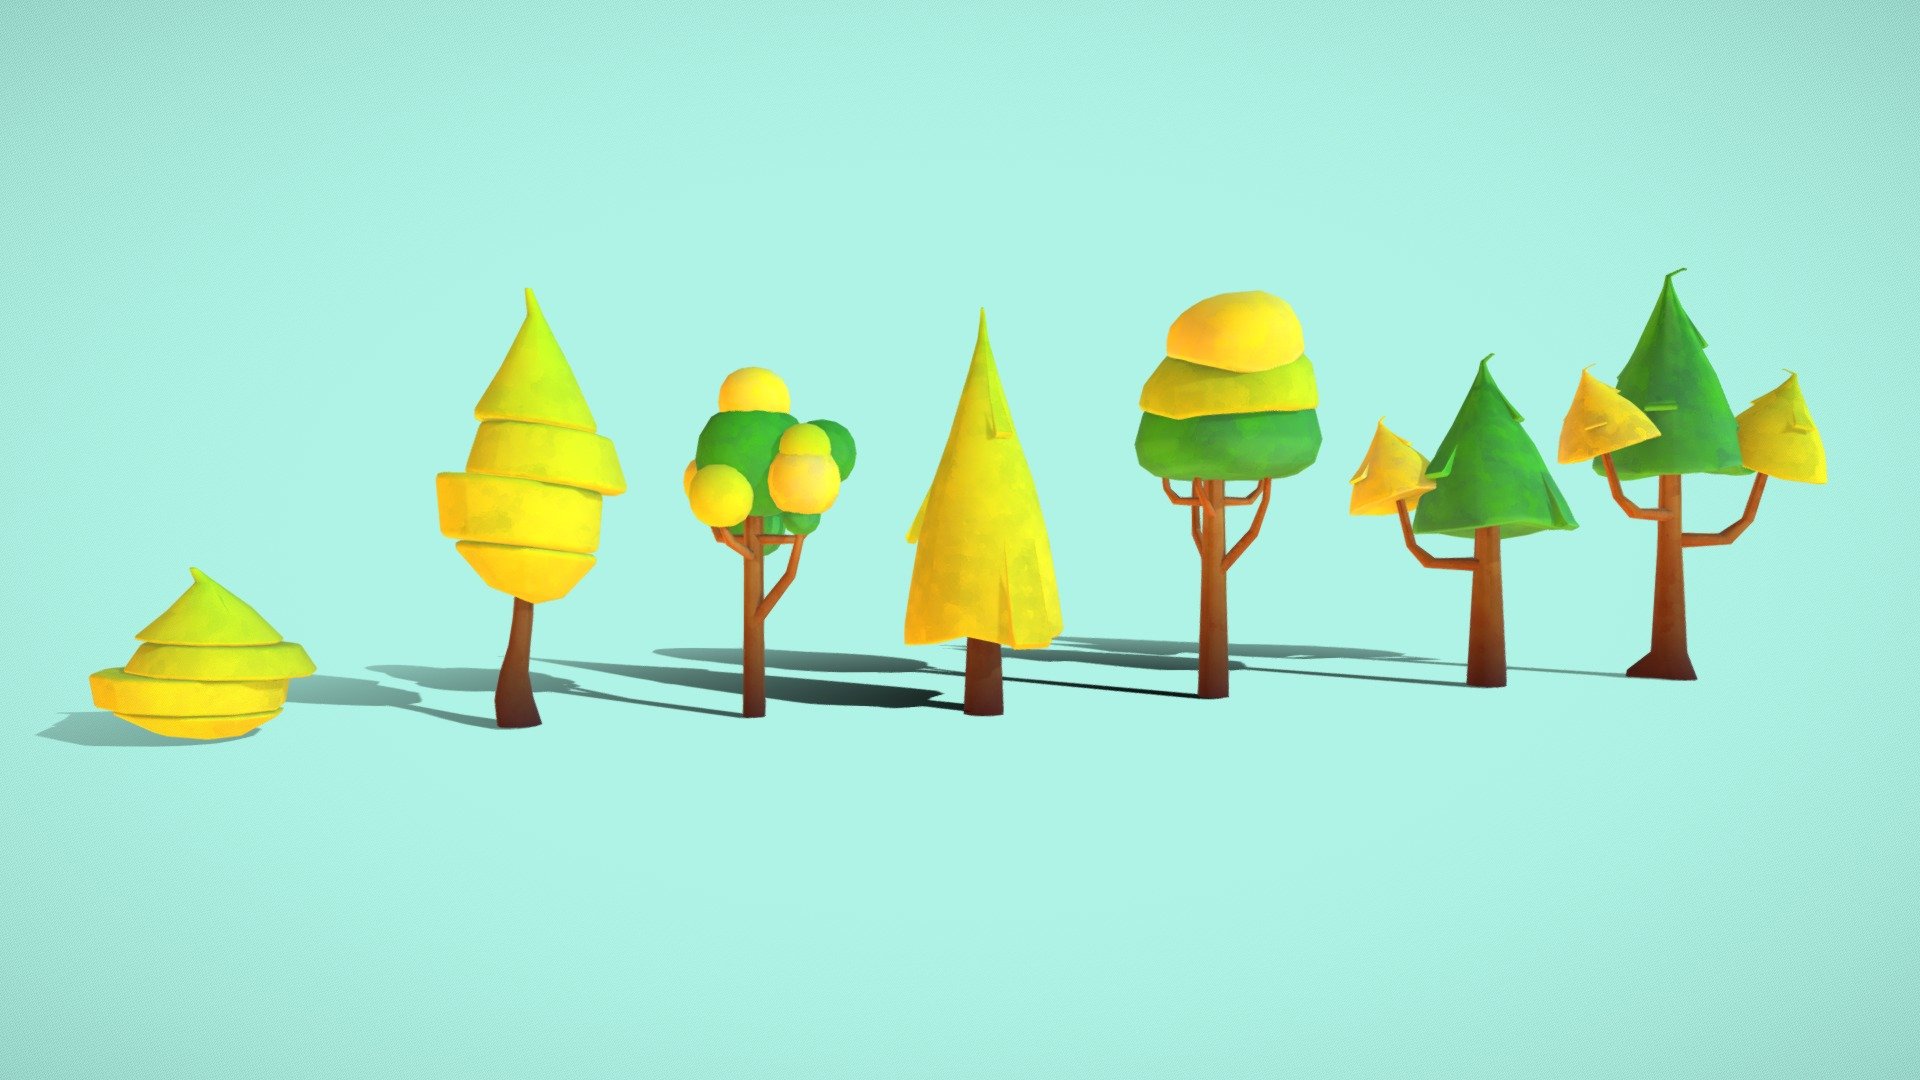 Low Poly Stylized Tree Pack 1 - Summer/Spring

Cute watercolor stylized trees for any forest environment. Check out my profile for the release of other color versions (winter and fall).

Please feel free to contact me if you have any problem with the assets 3d model